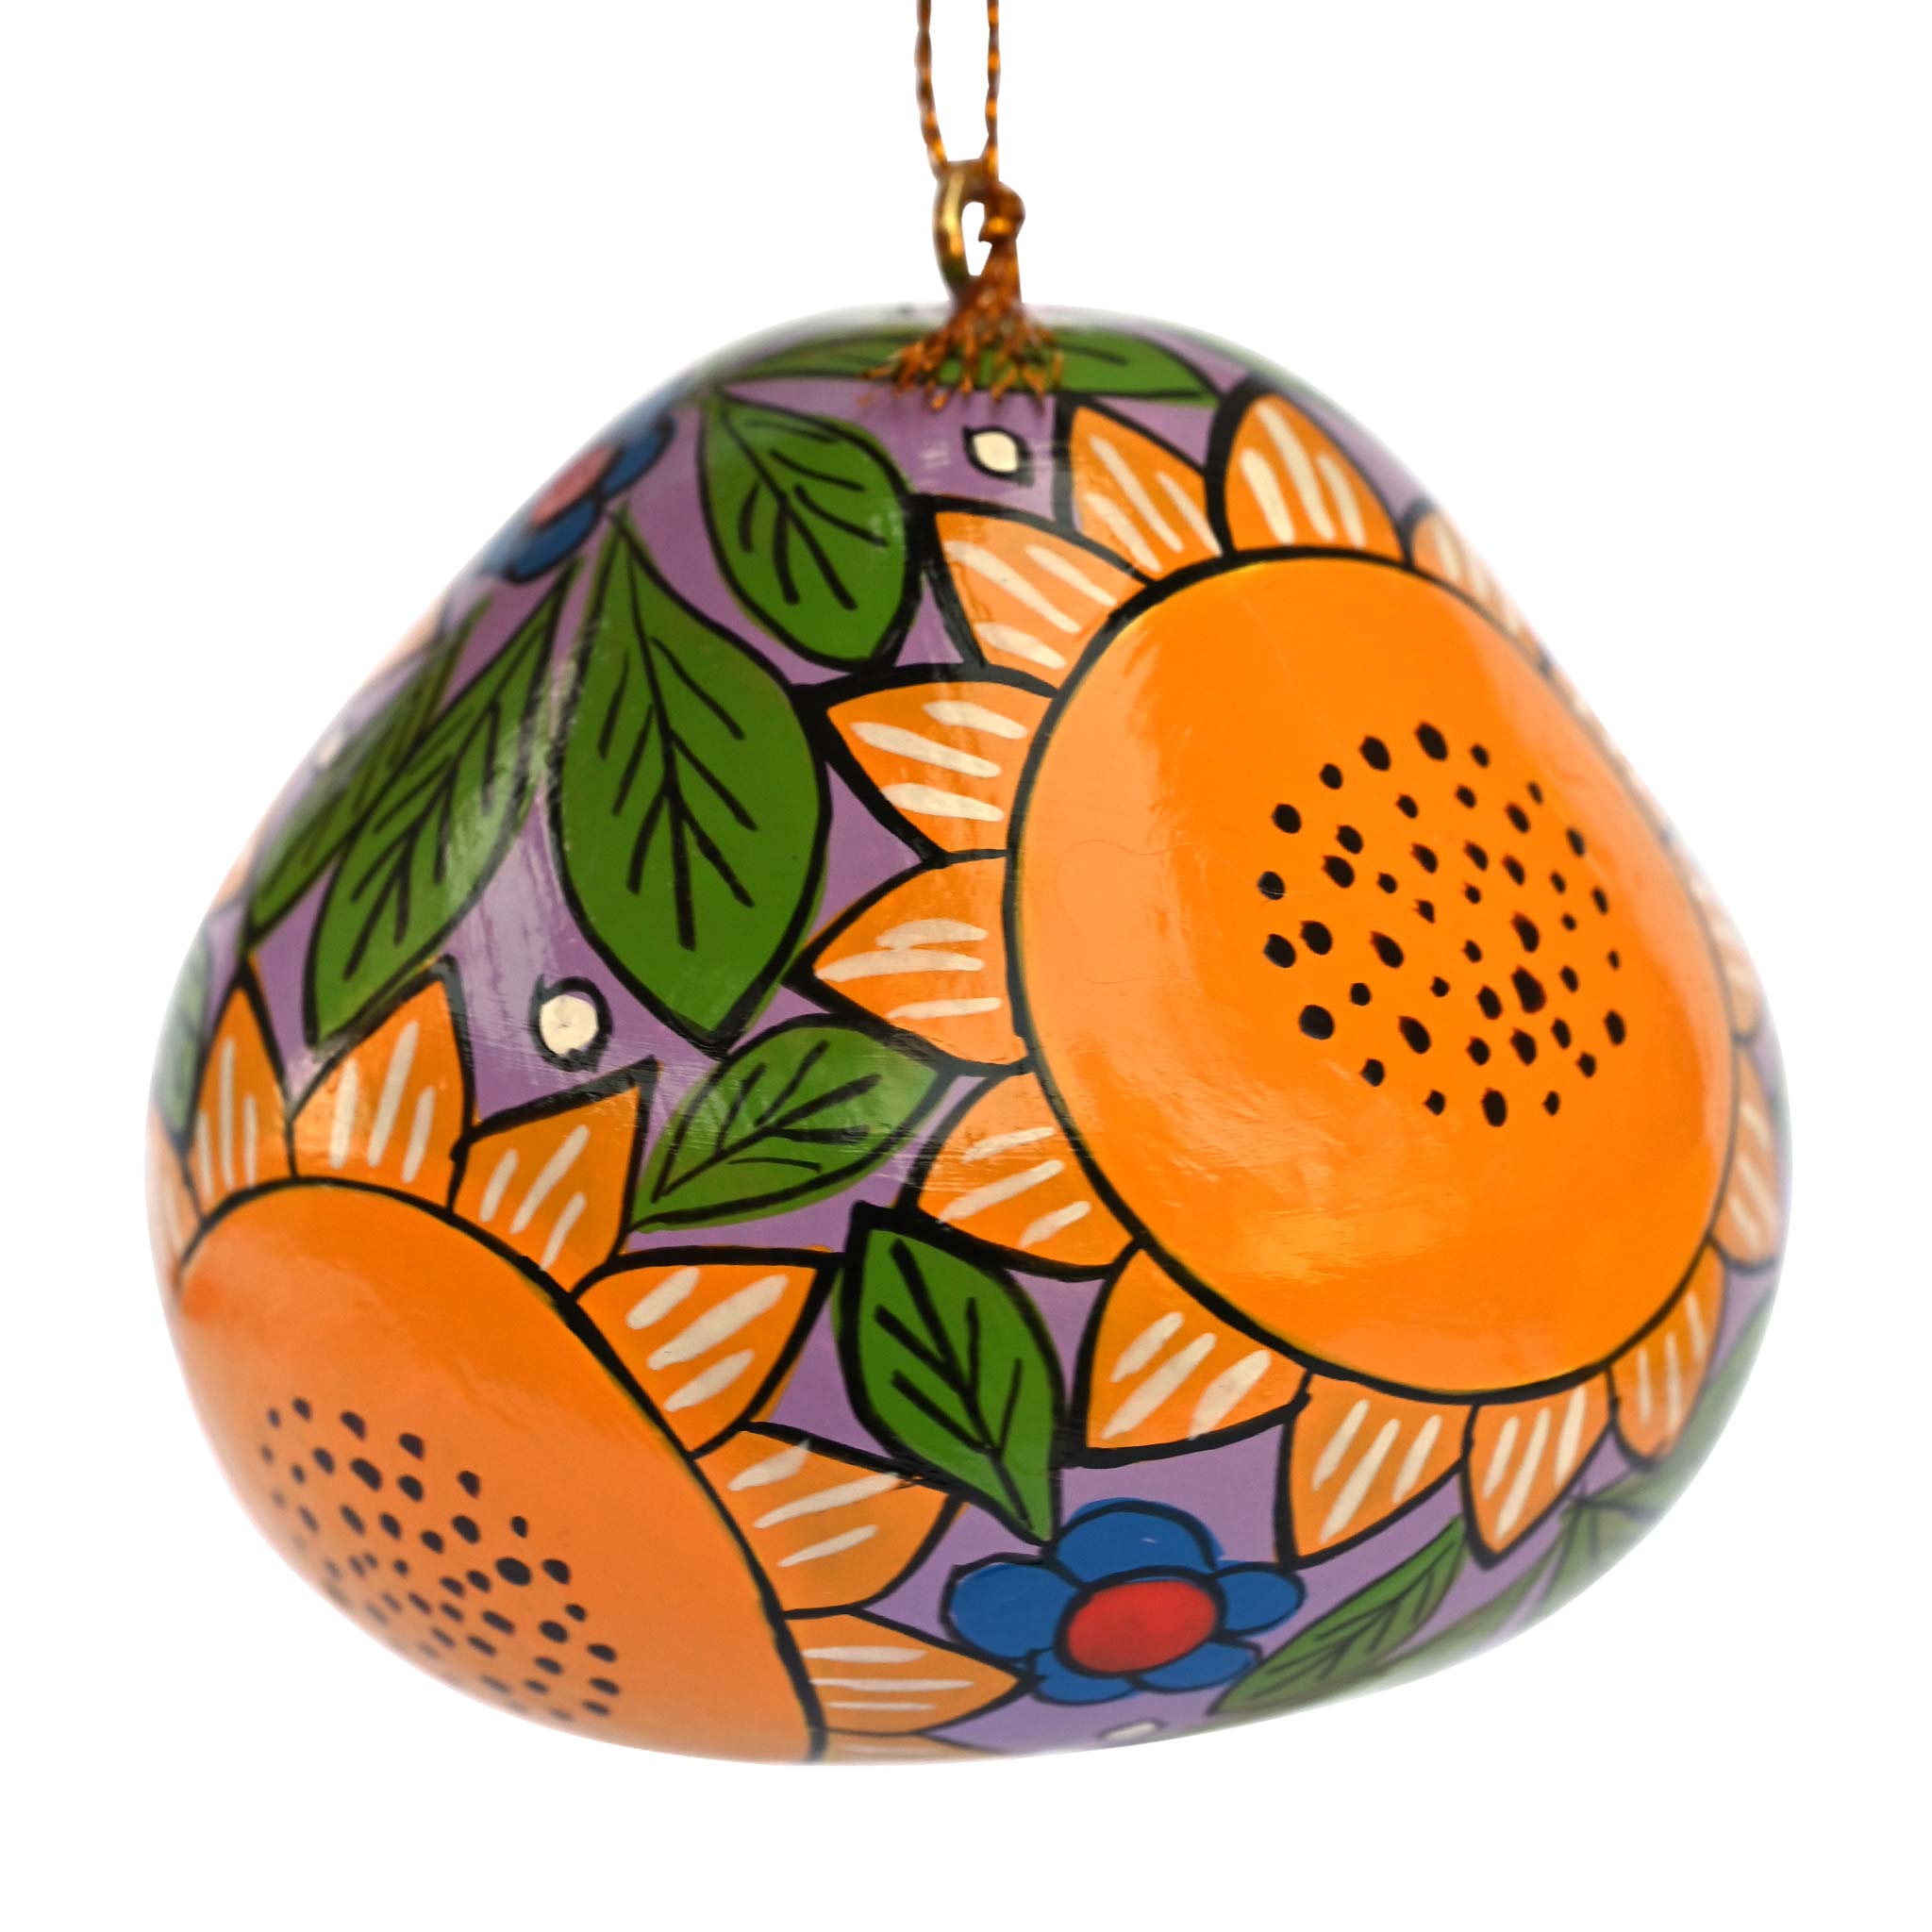 Sunflowers - Painted Gourd Ornament (sold as 6's)